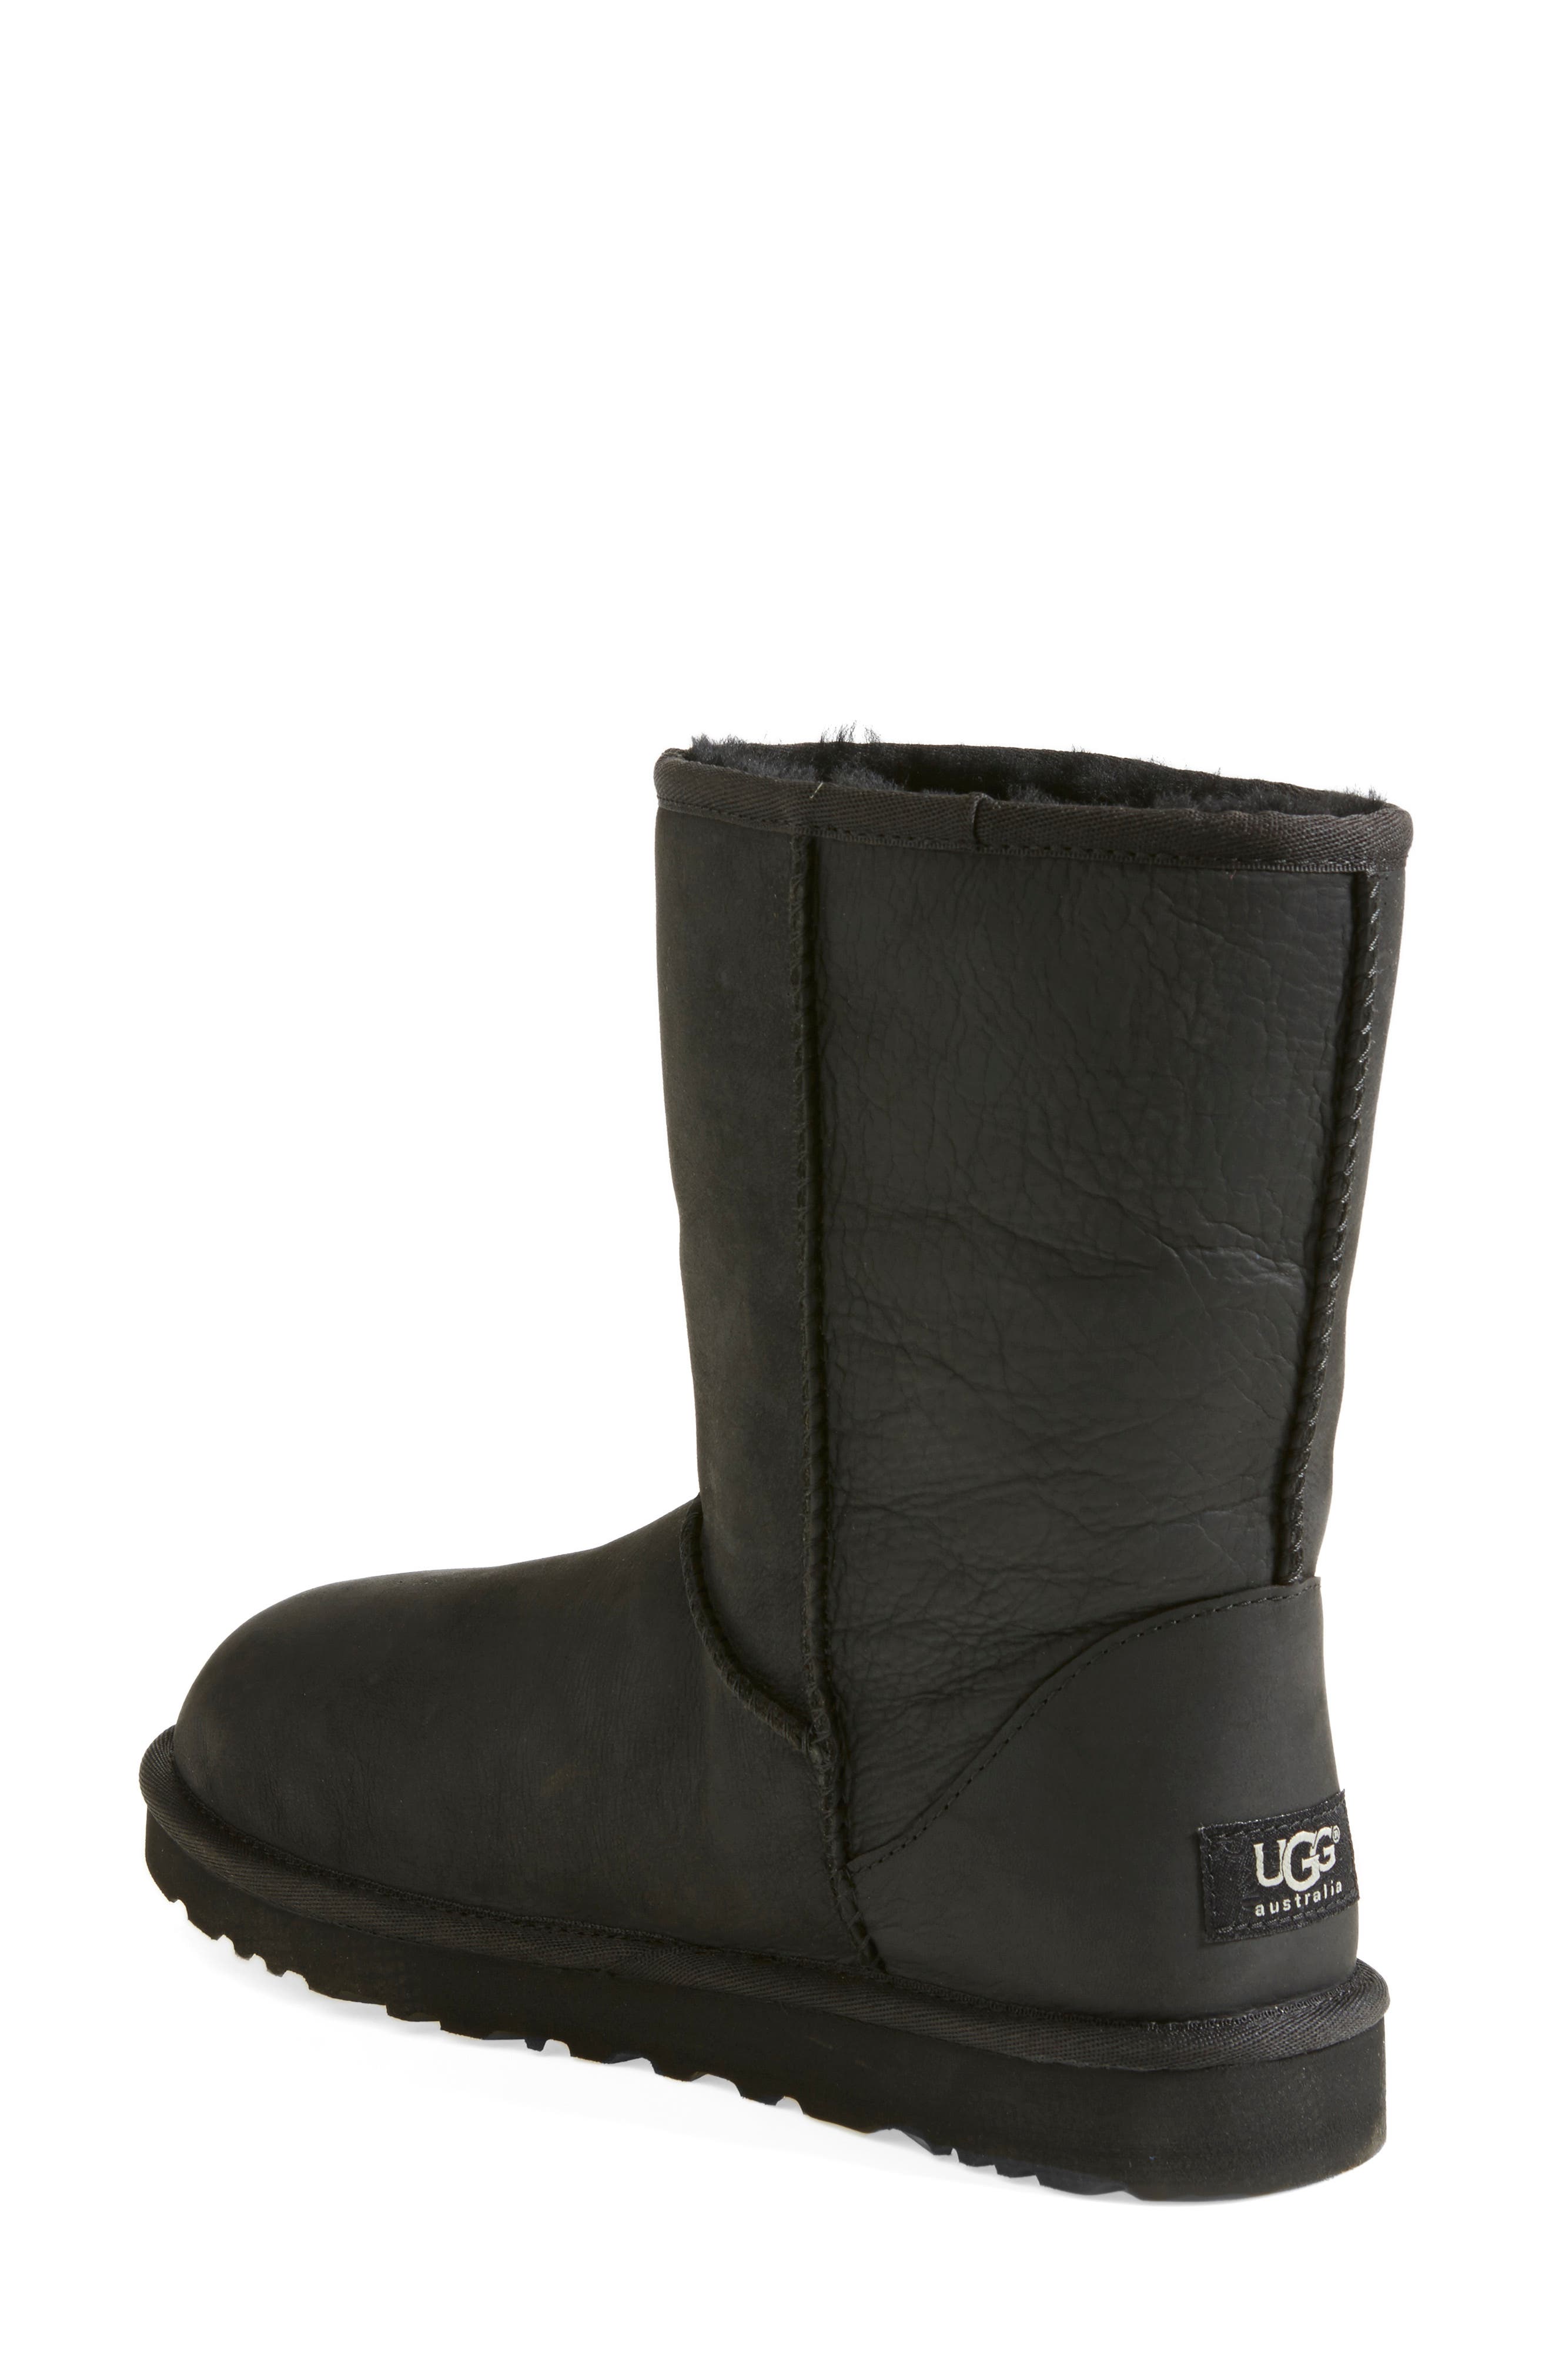 ugg wool lined boots